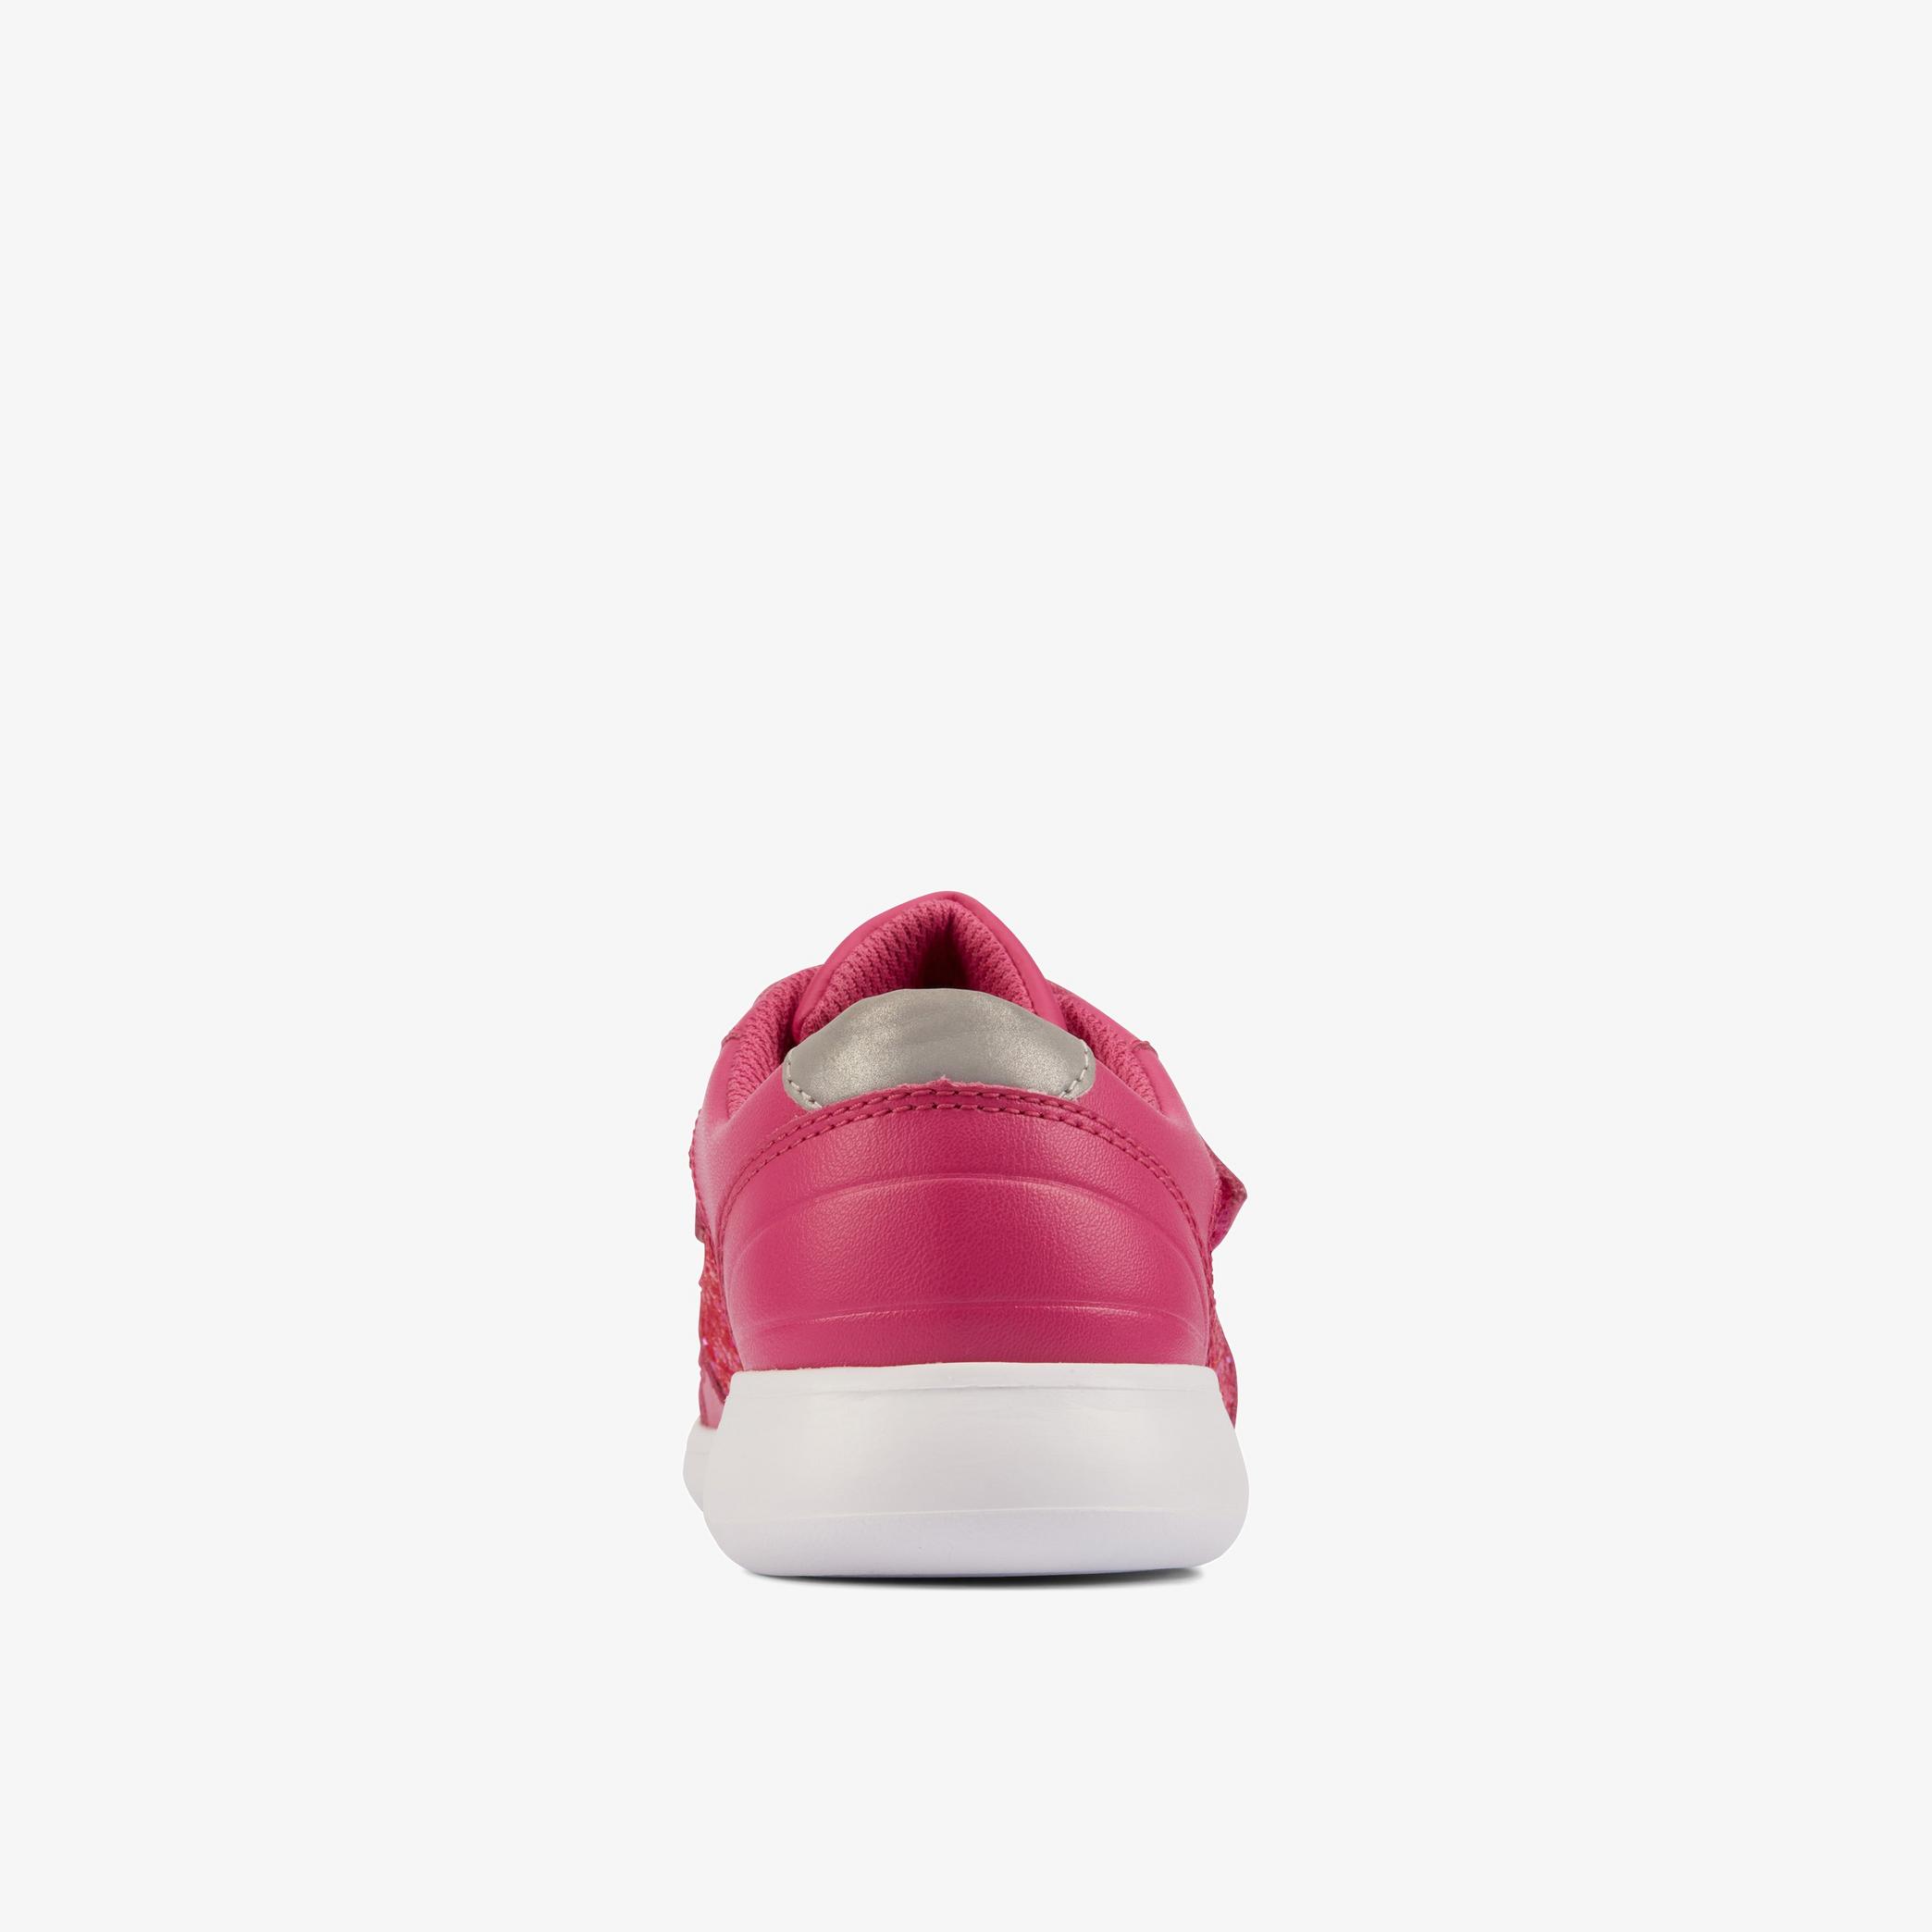 Scape Spirit Kid Lipstick Pink Leather Shoes, view 5 of 6